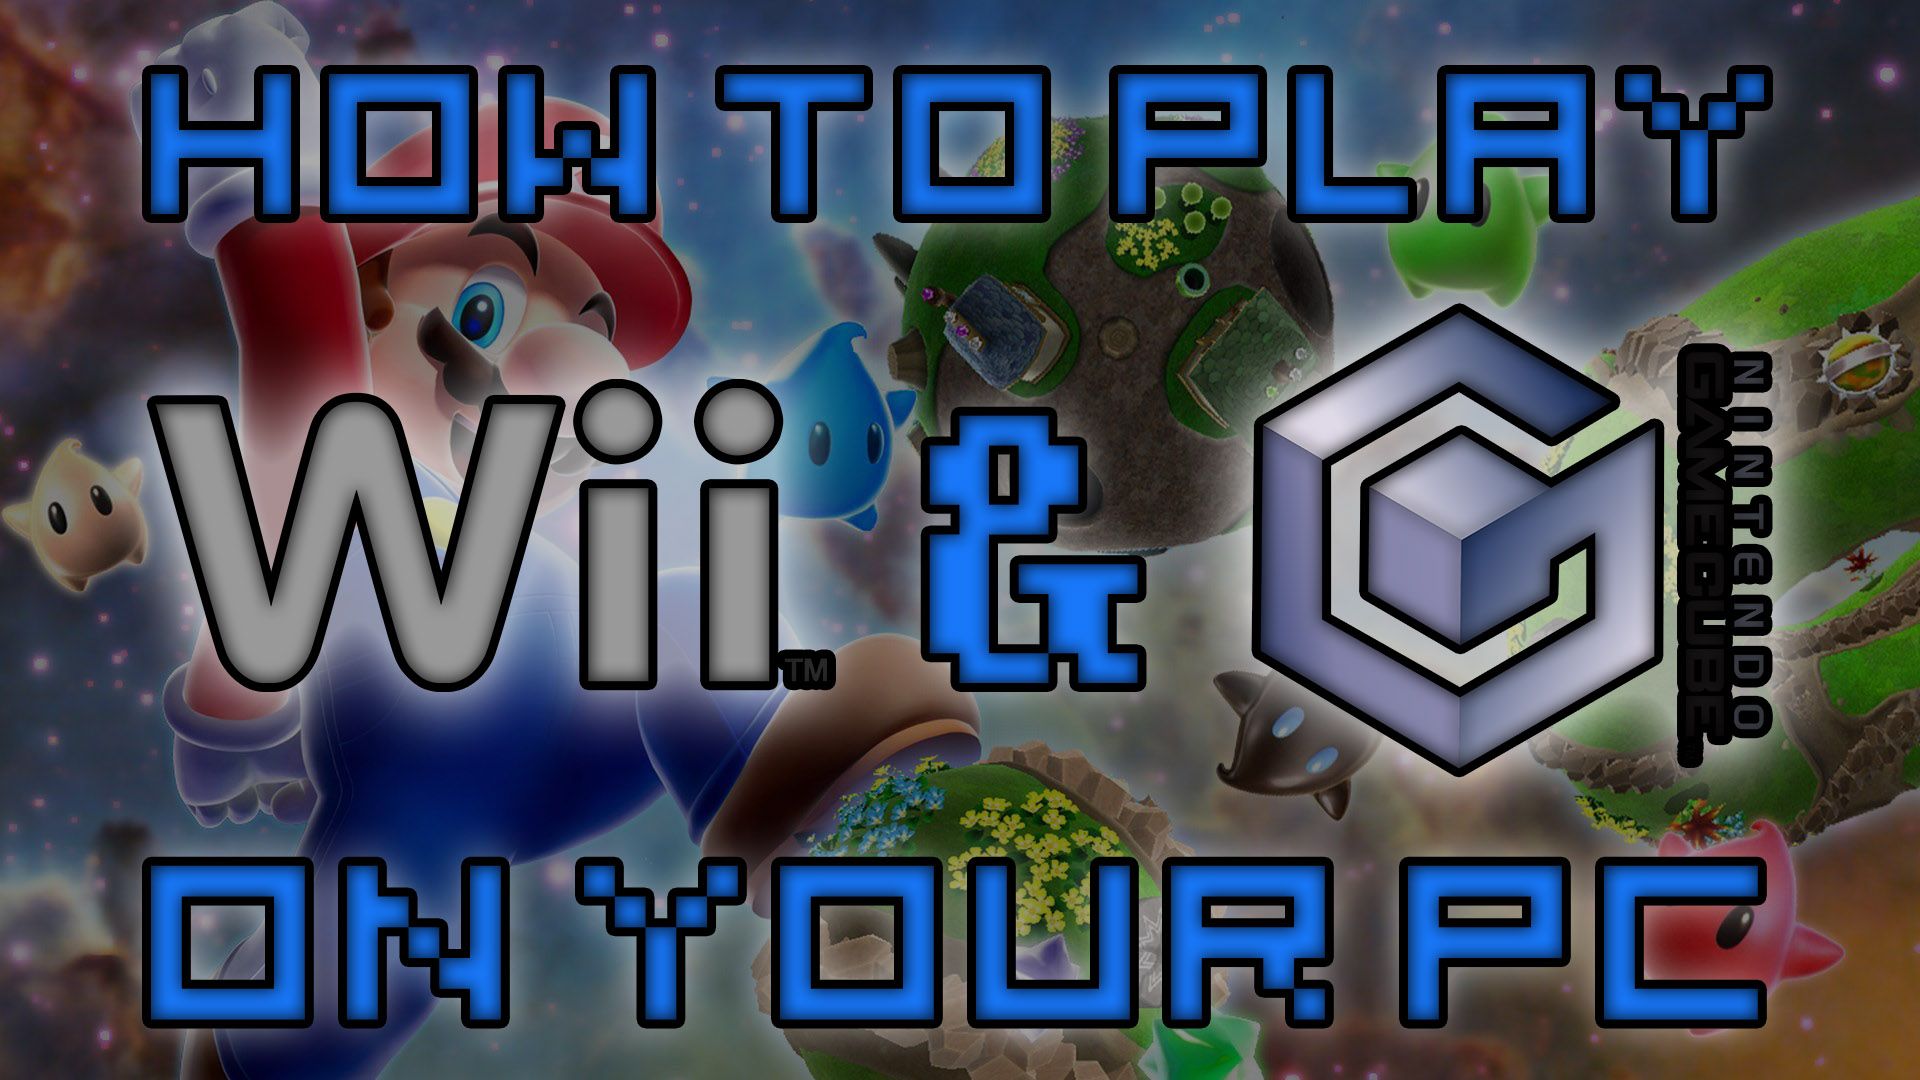 gamecube emulator for pc how to